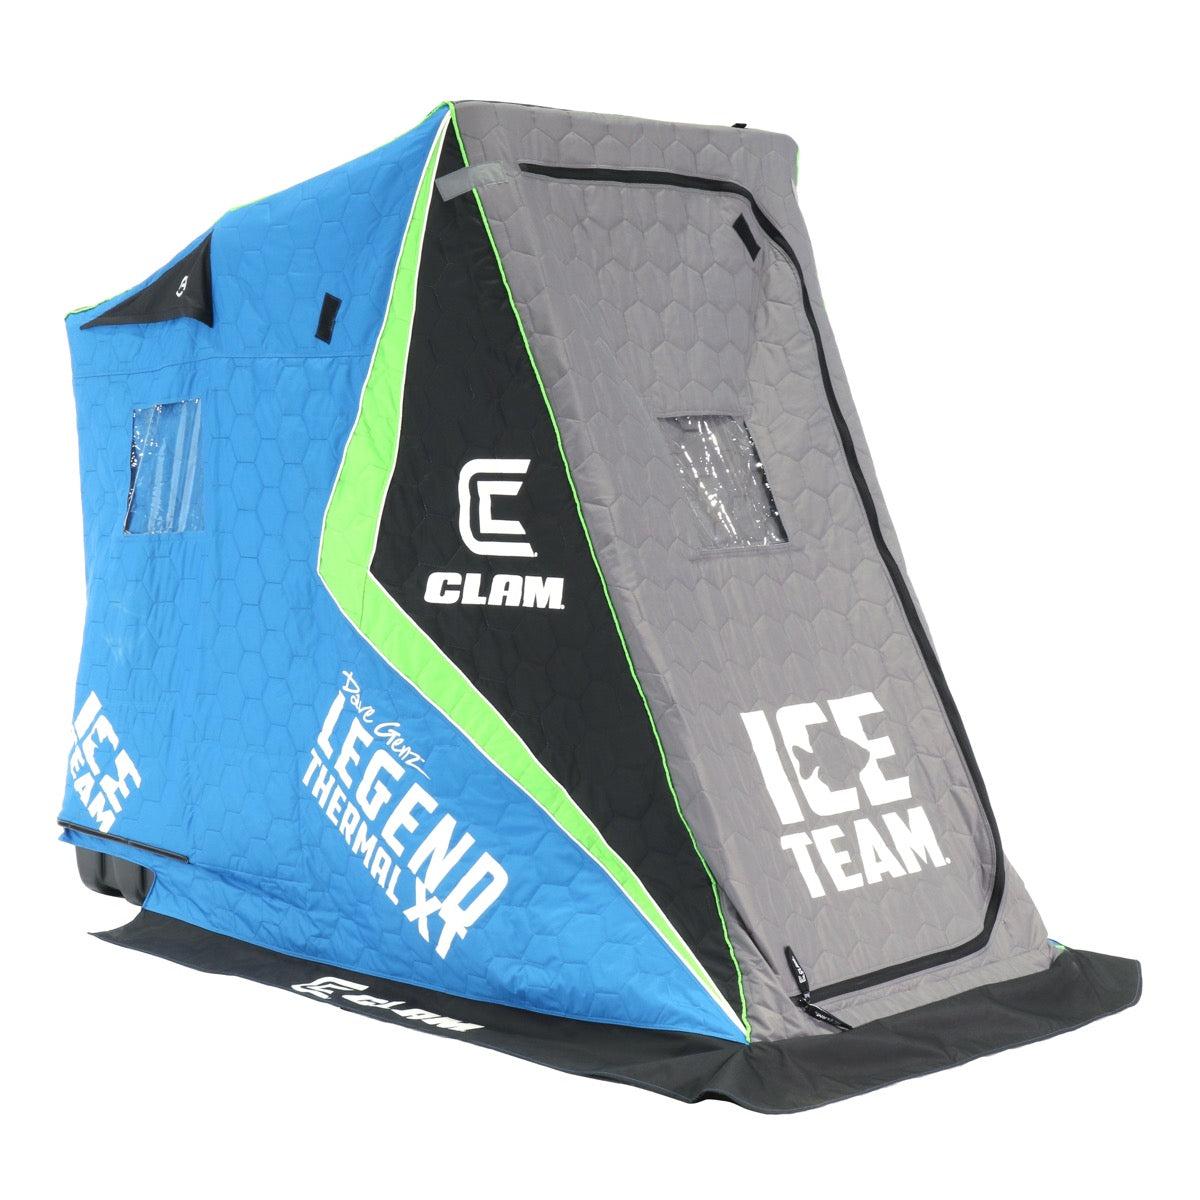 CLAM Legend XT Thermal ICE TEAM Shelter - FREE SHIPPING